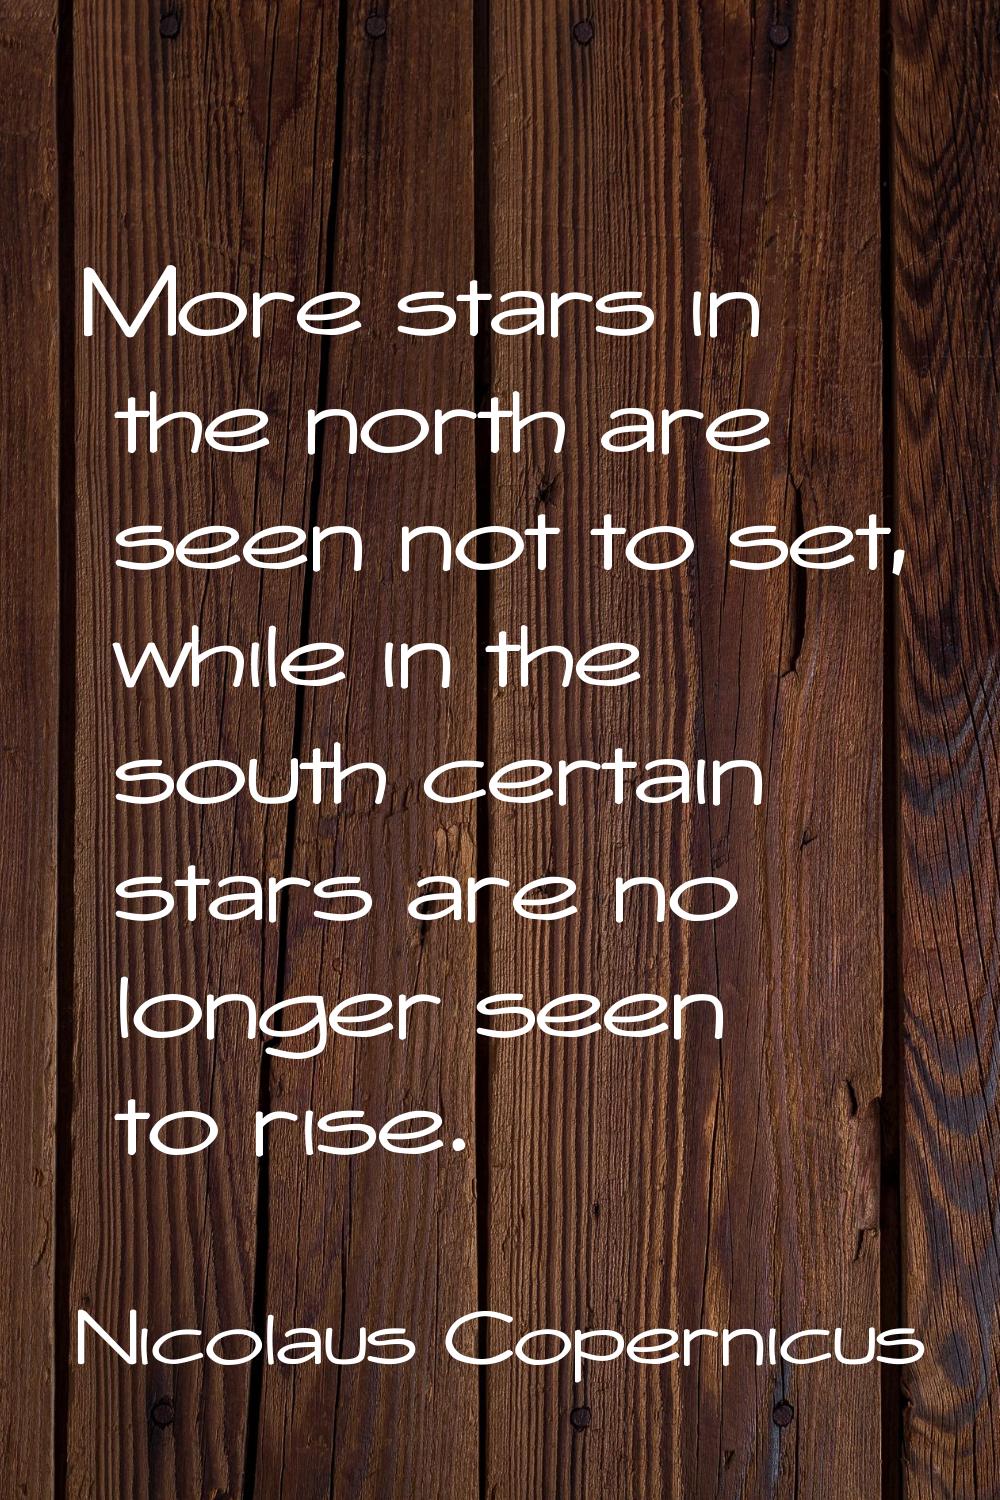 More stars in the north are seen not to set, while in the south certain stars are no longer seen to